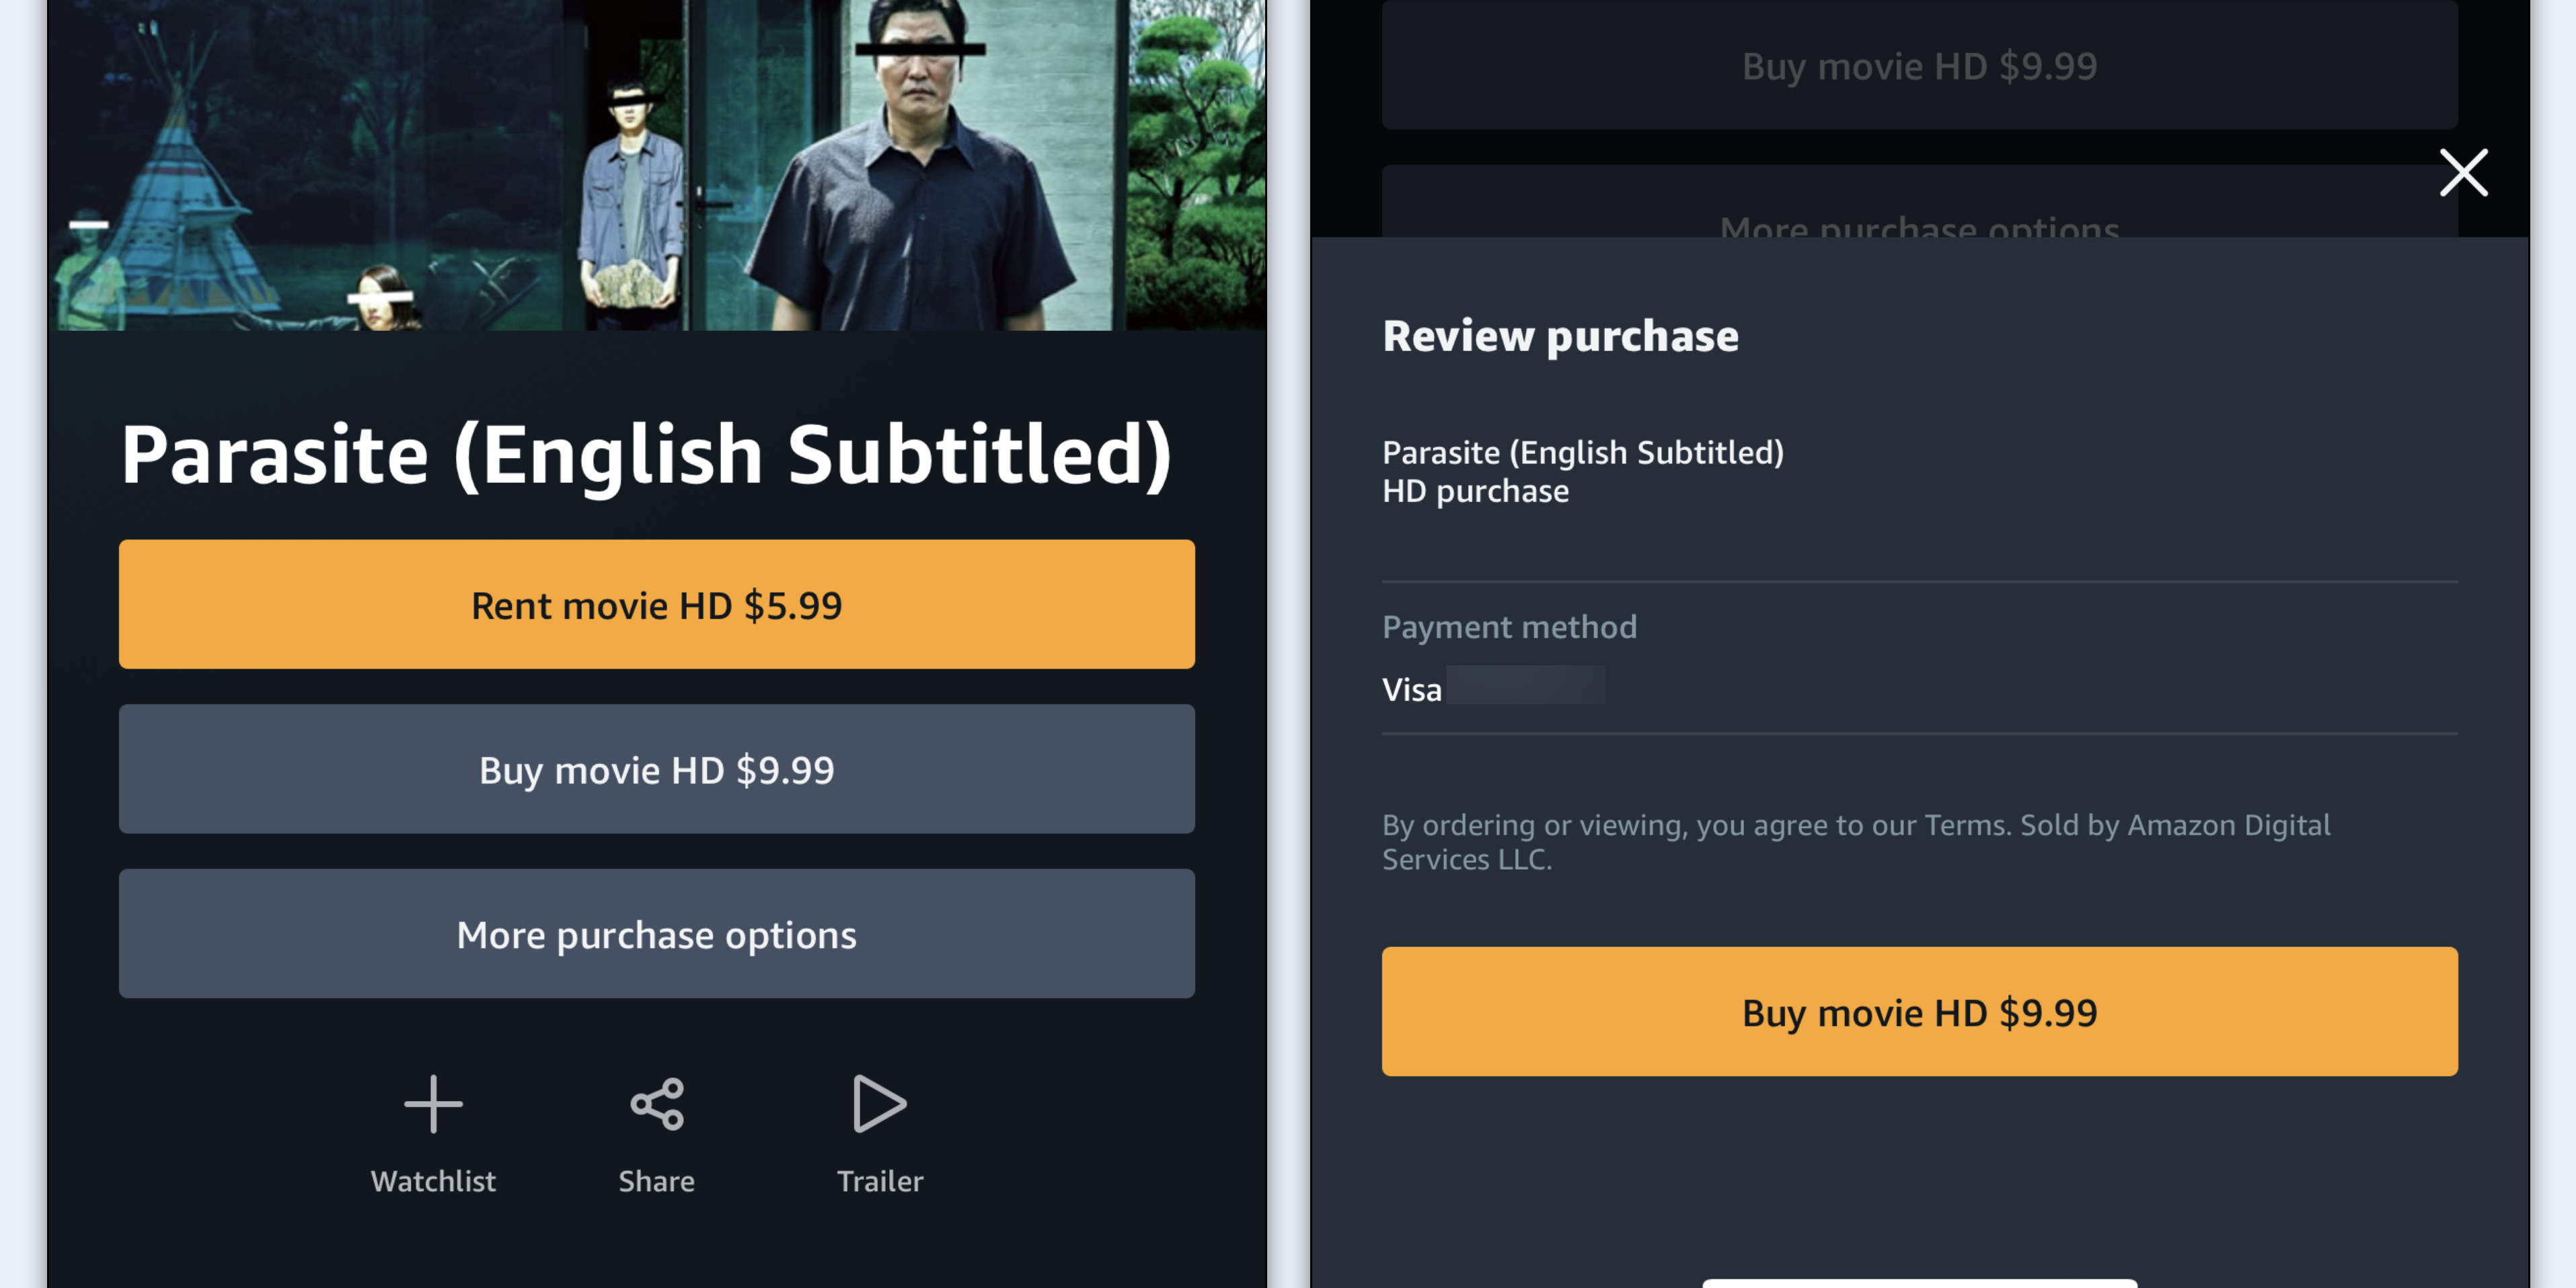 Amazon Prime Video now lets users buy TV shows and movies in the app, seemingly struck special deal with Apple